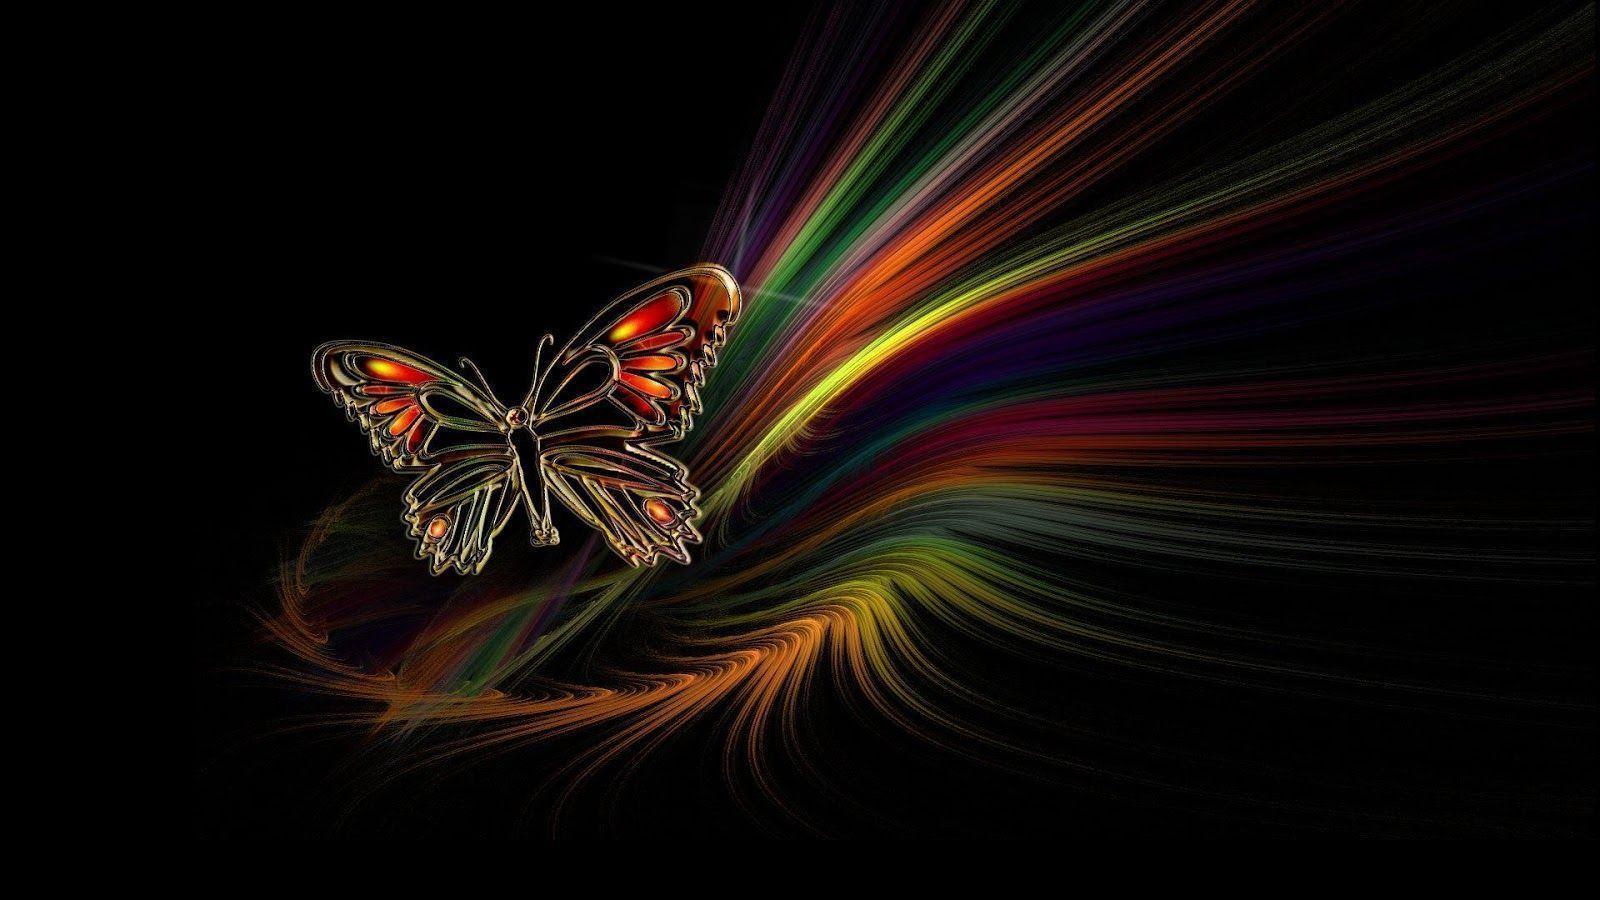 Colorful Abstract Butterfly Wallpaper. Viewallpaper